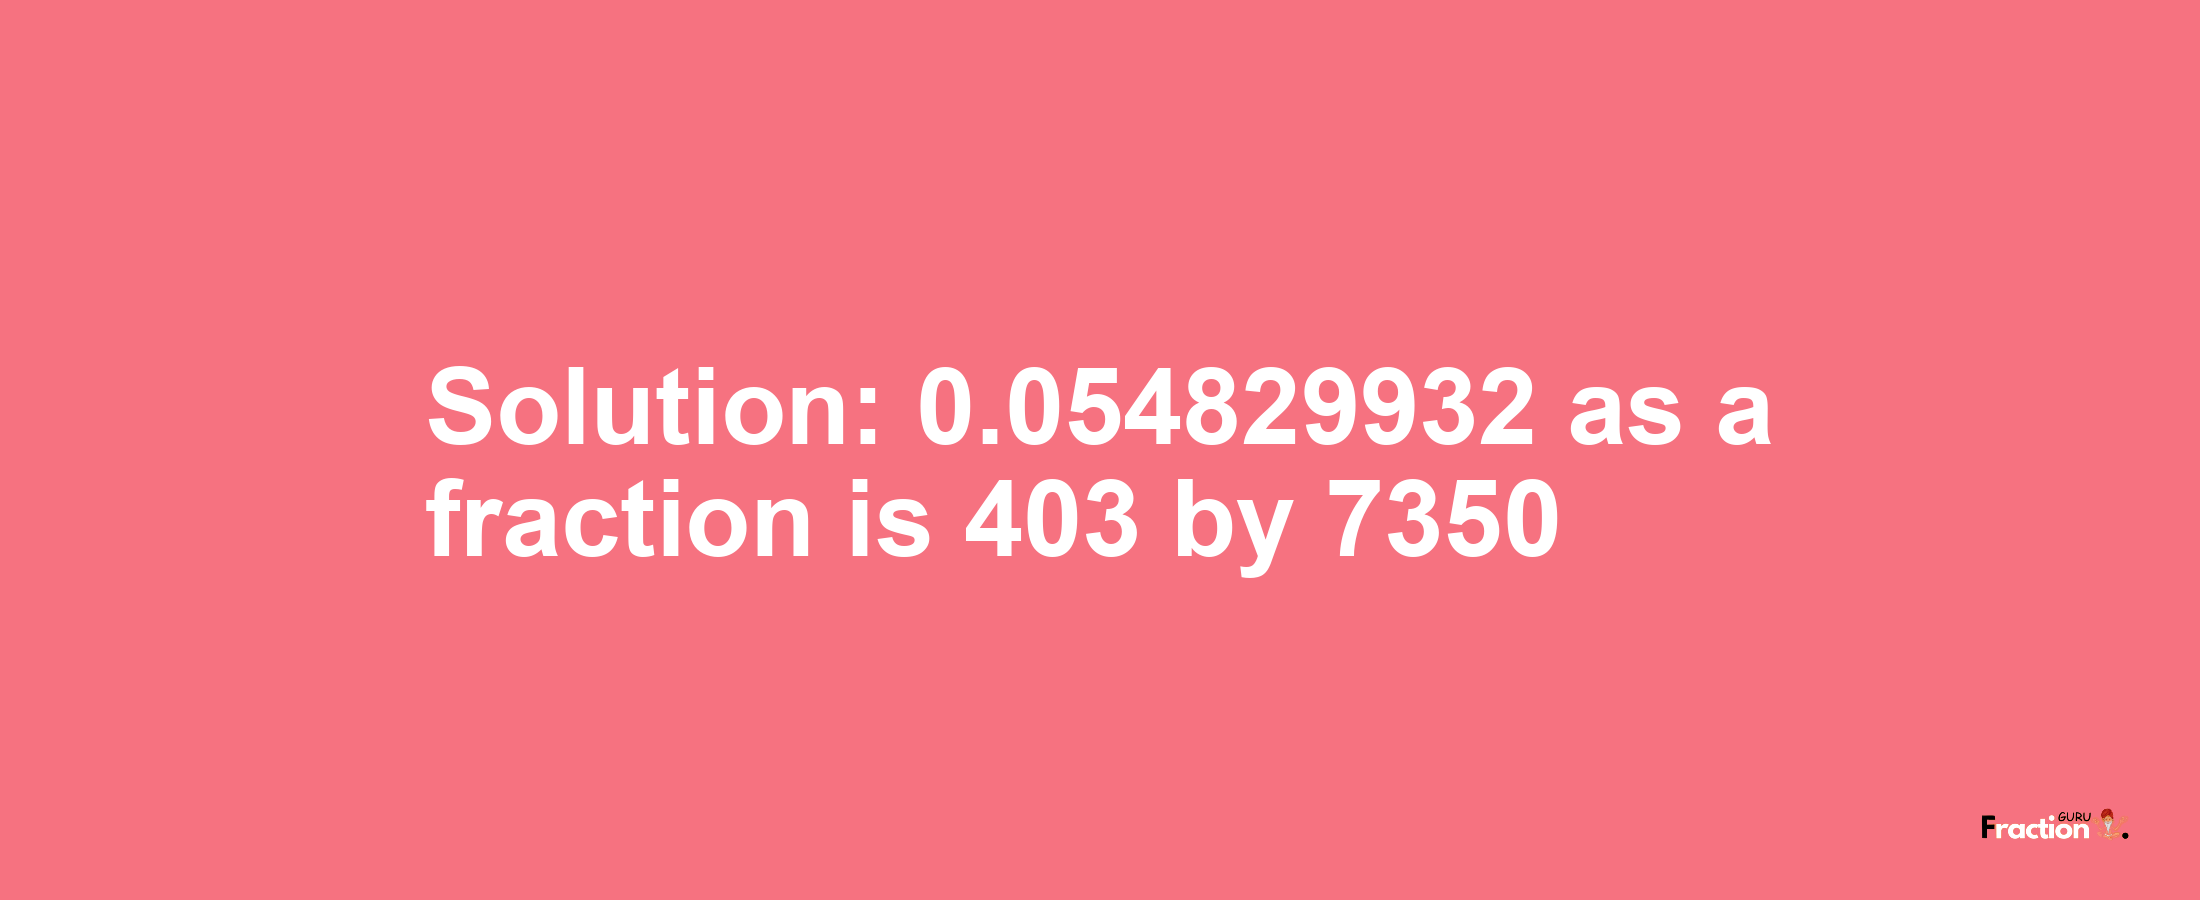 Solution:0.054829932 as a fraction is 403/7350